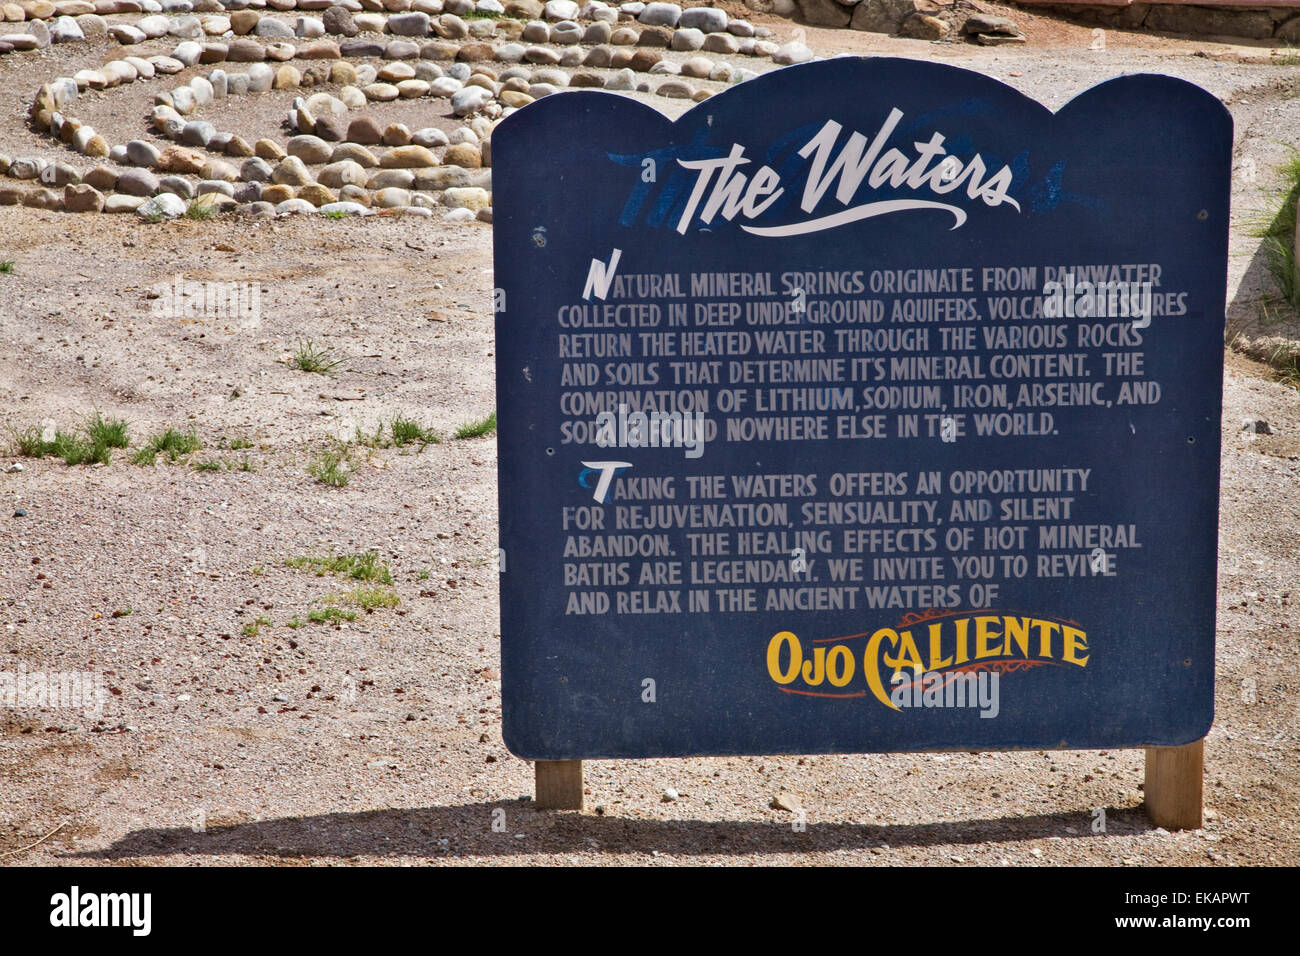 The  history and details of the Ojo Caliente Mineral Springs Resort and Spa in northern New Mexico  is described on a sign. Stock Photo